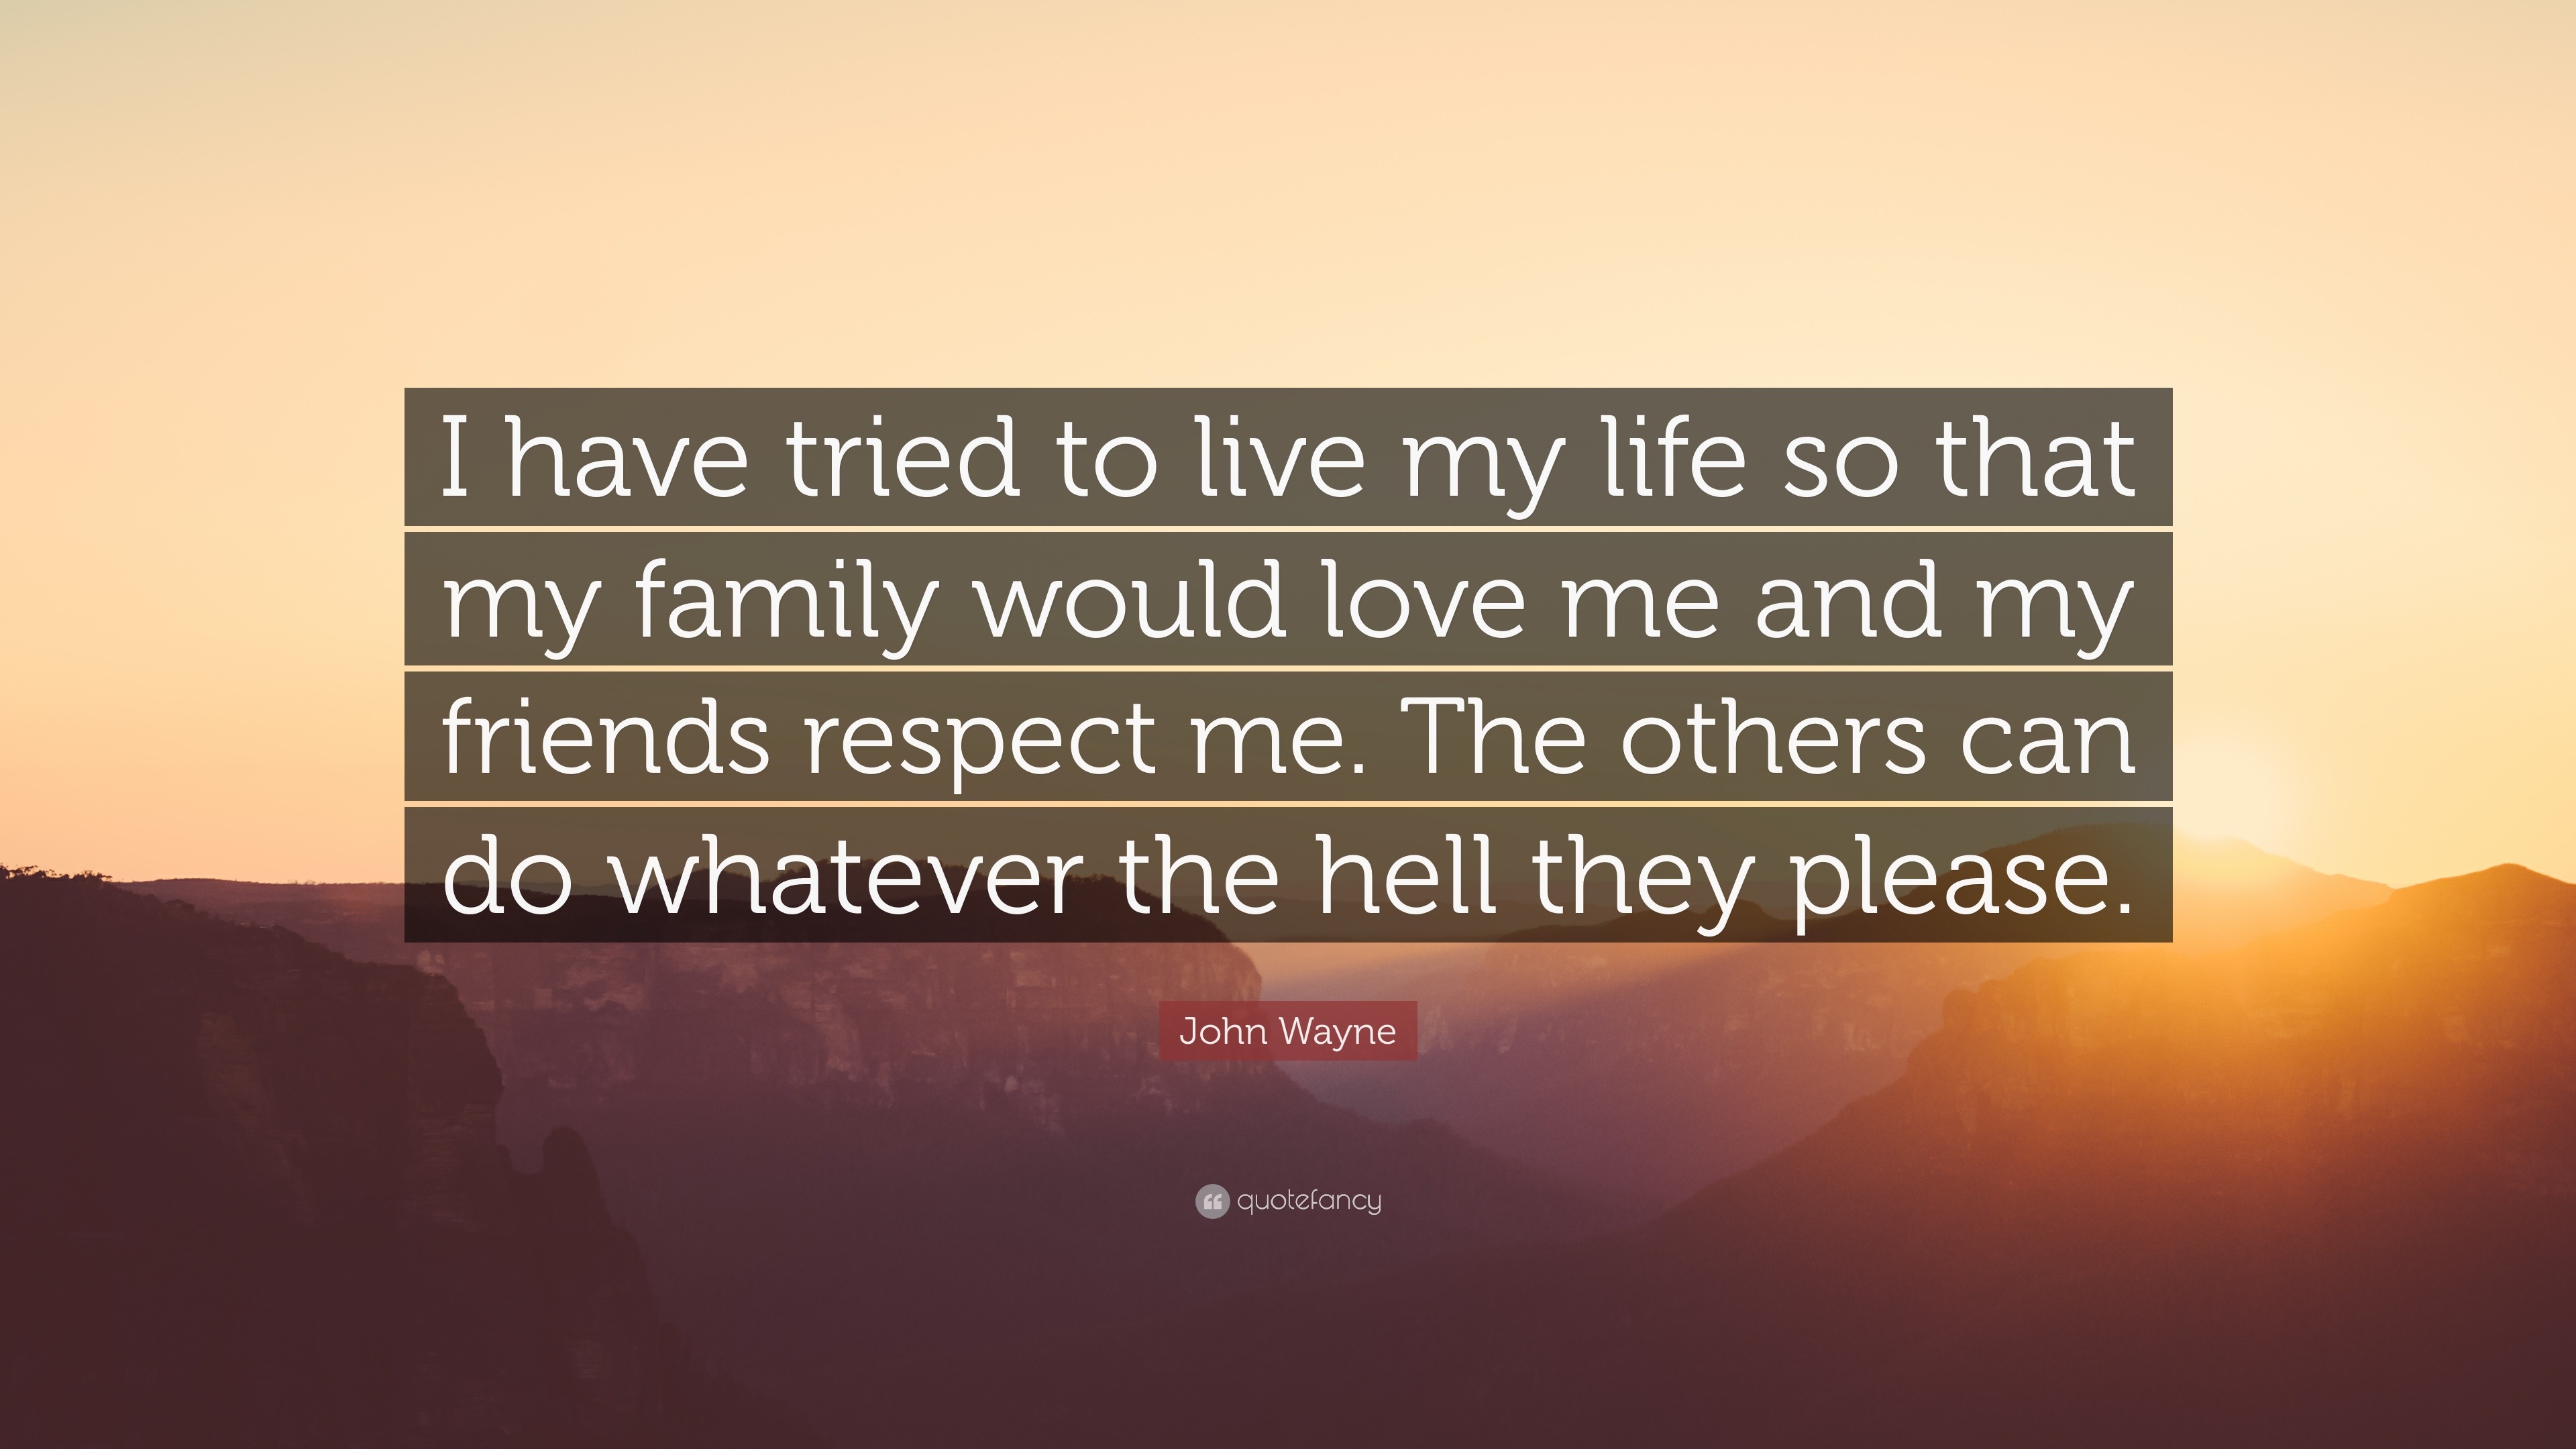 John Wayne Quote “I have tried to live my life so that my family